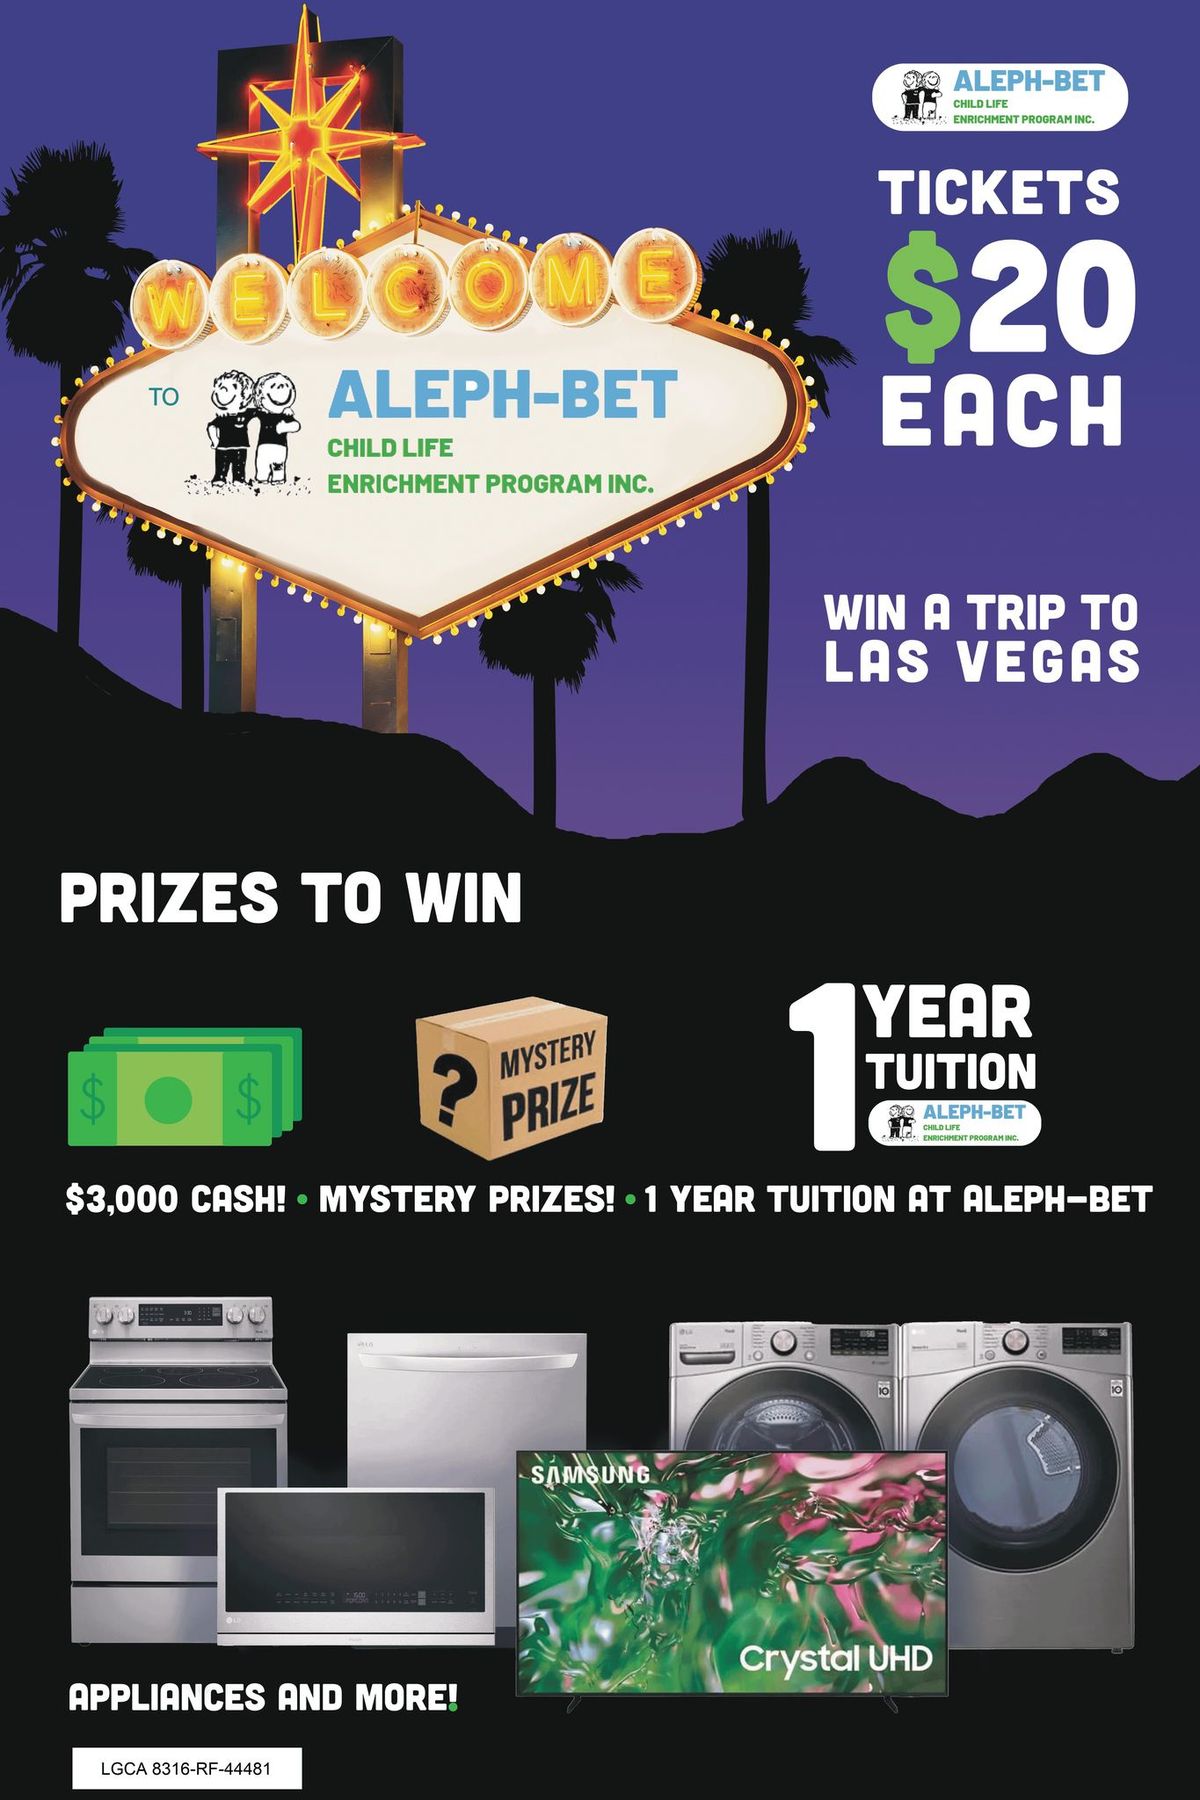 THE GREAT ALEPH-BET SWEEPSTAKES EVENT!!!